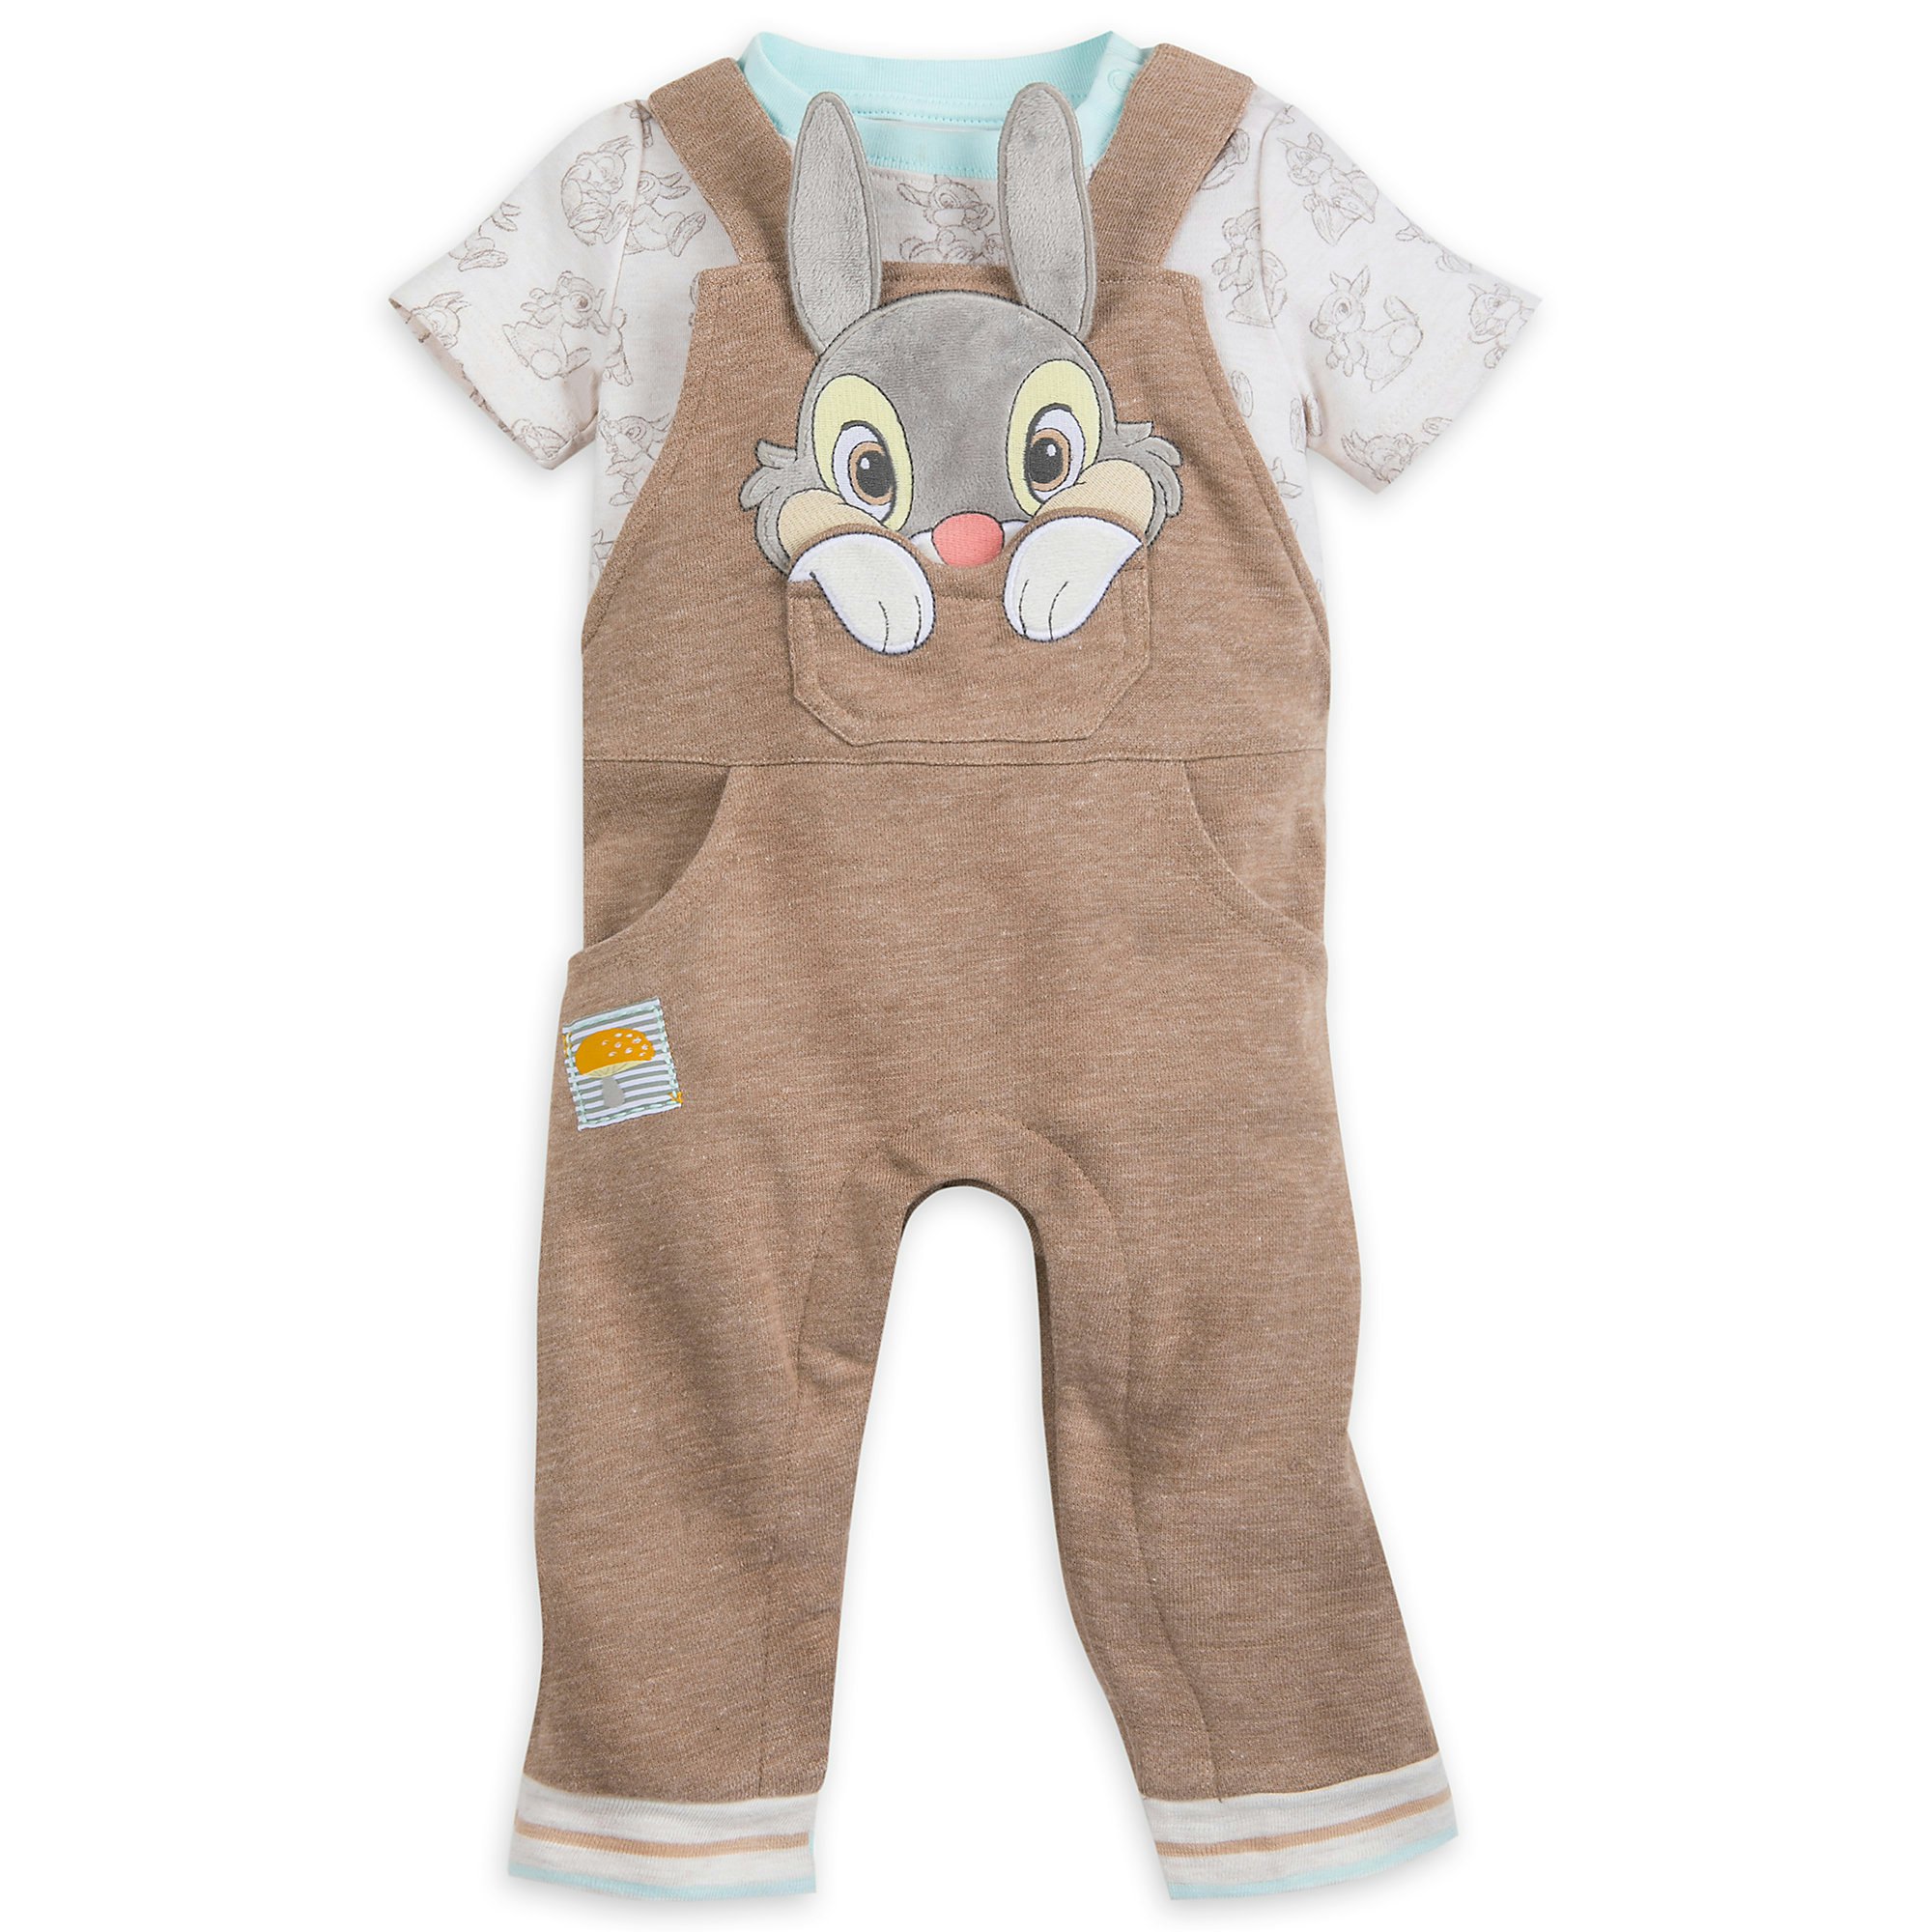 disney thumper baby clothes